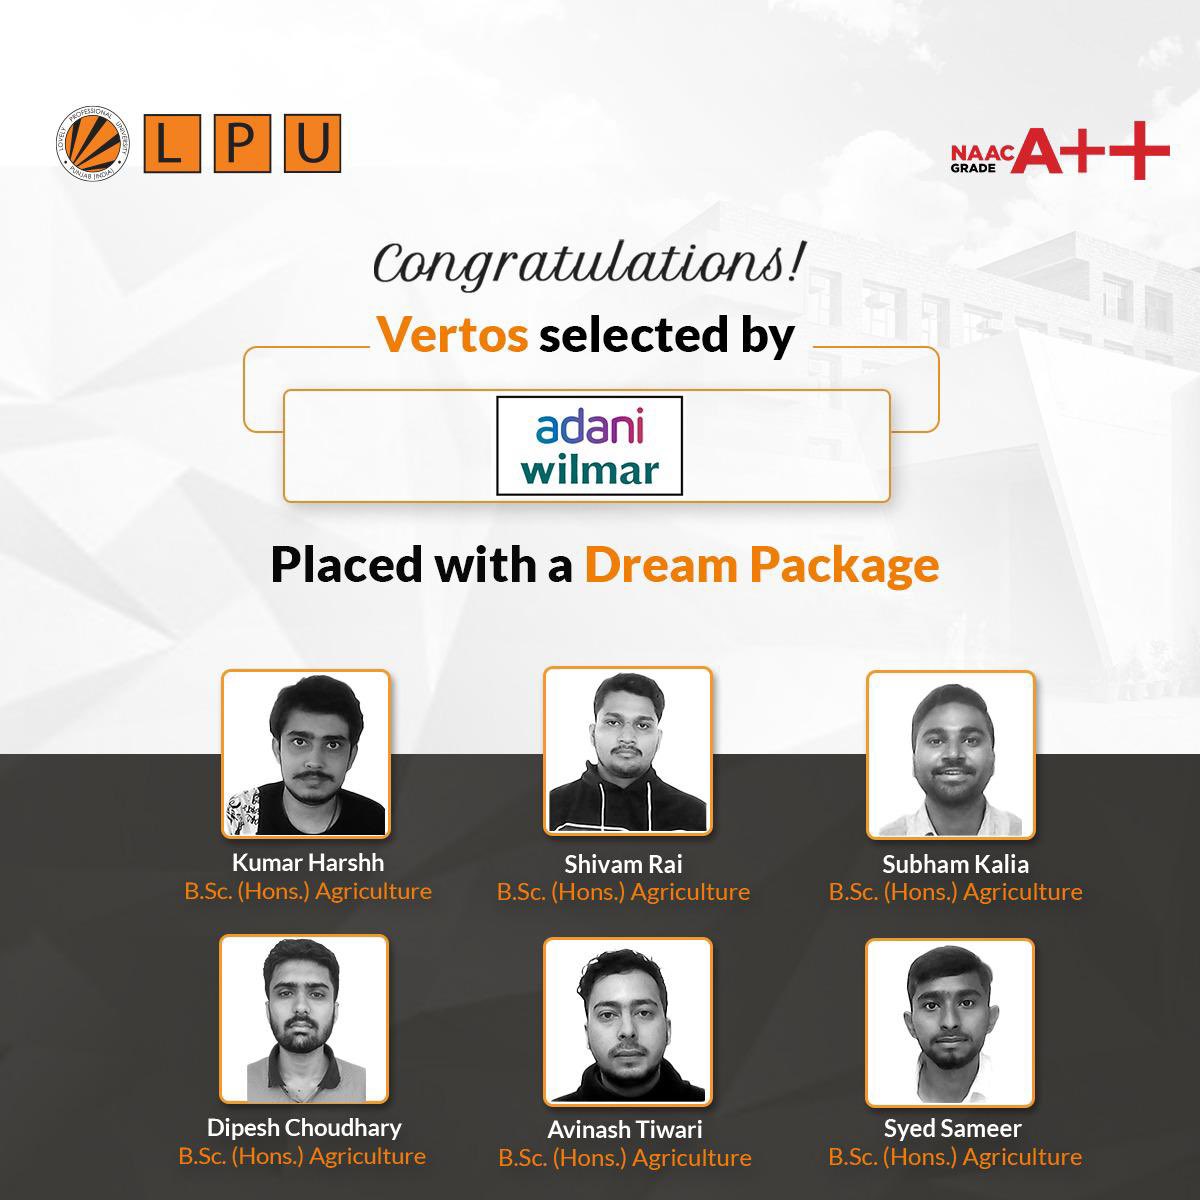 Leading India to new heights! Congratulations to our #ProudVertos for starting a transformative career with a Dream Package at Adani Wilmar, one of India's leading multinational conglomerates!